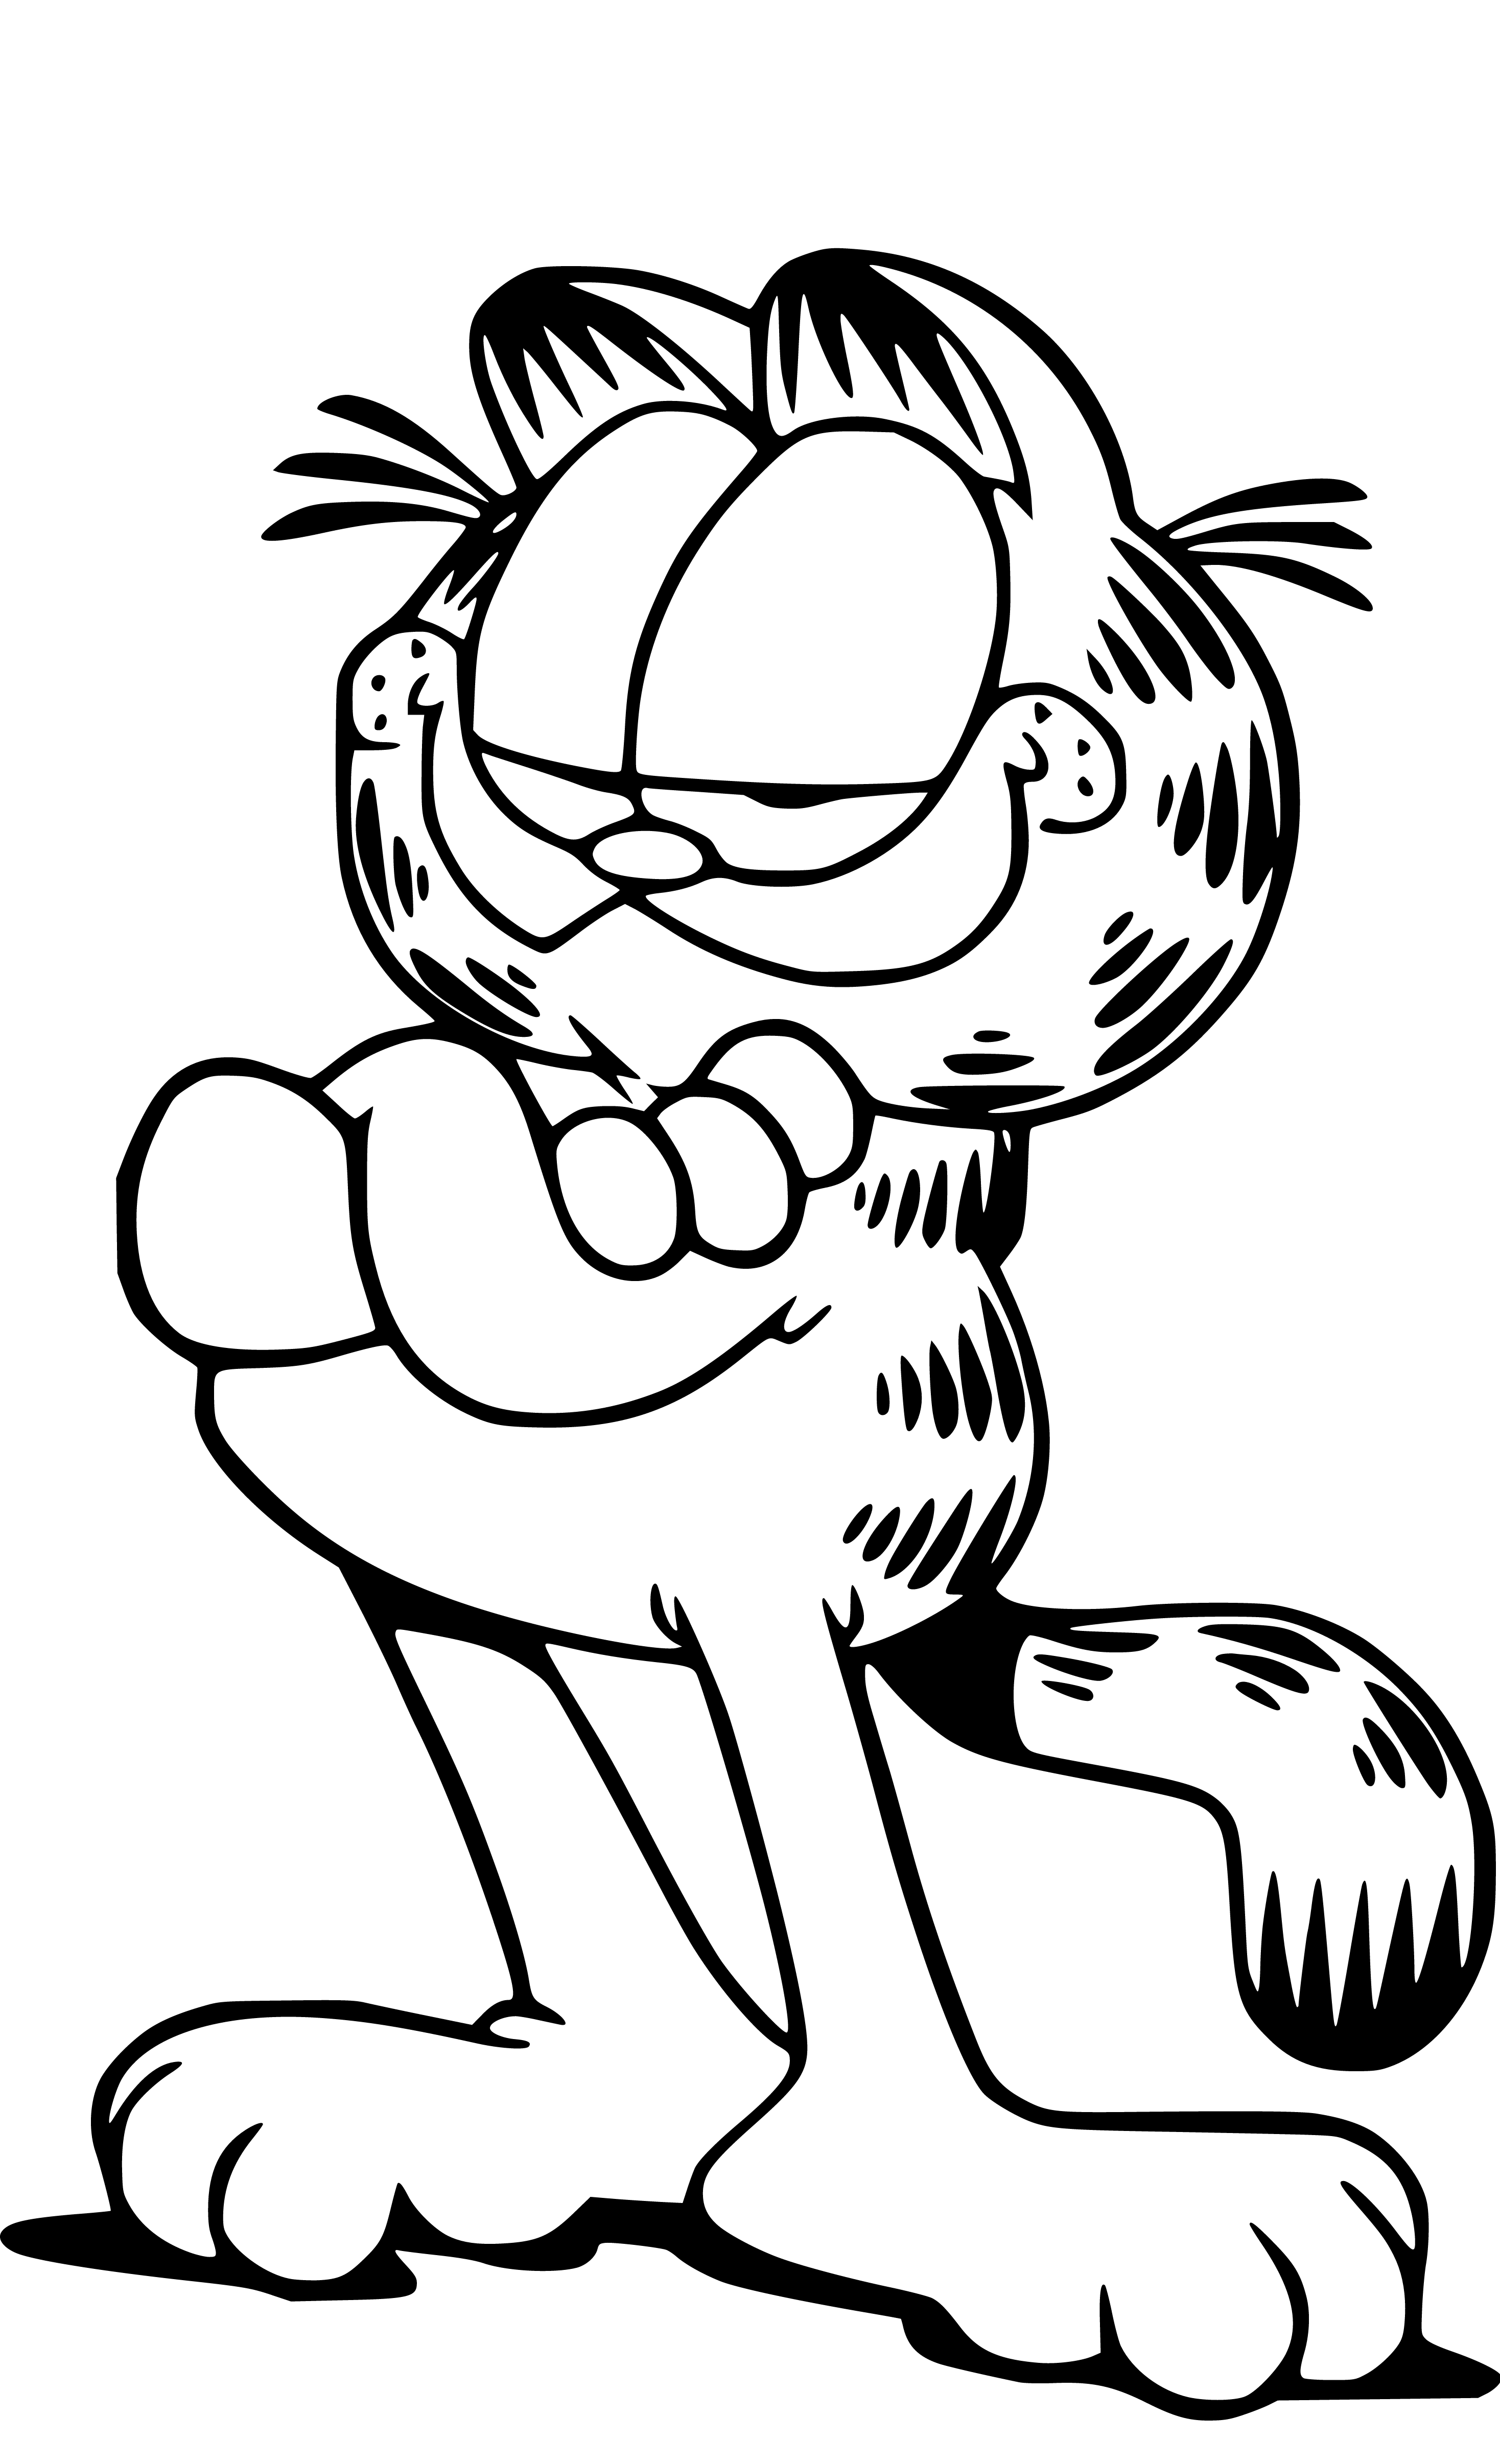 Printable Lazy Garfield Coloring Page for kids.